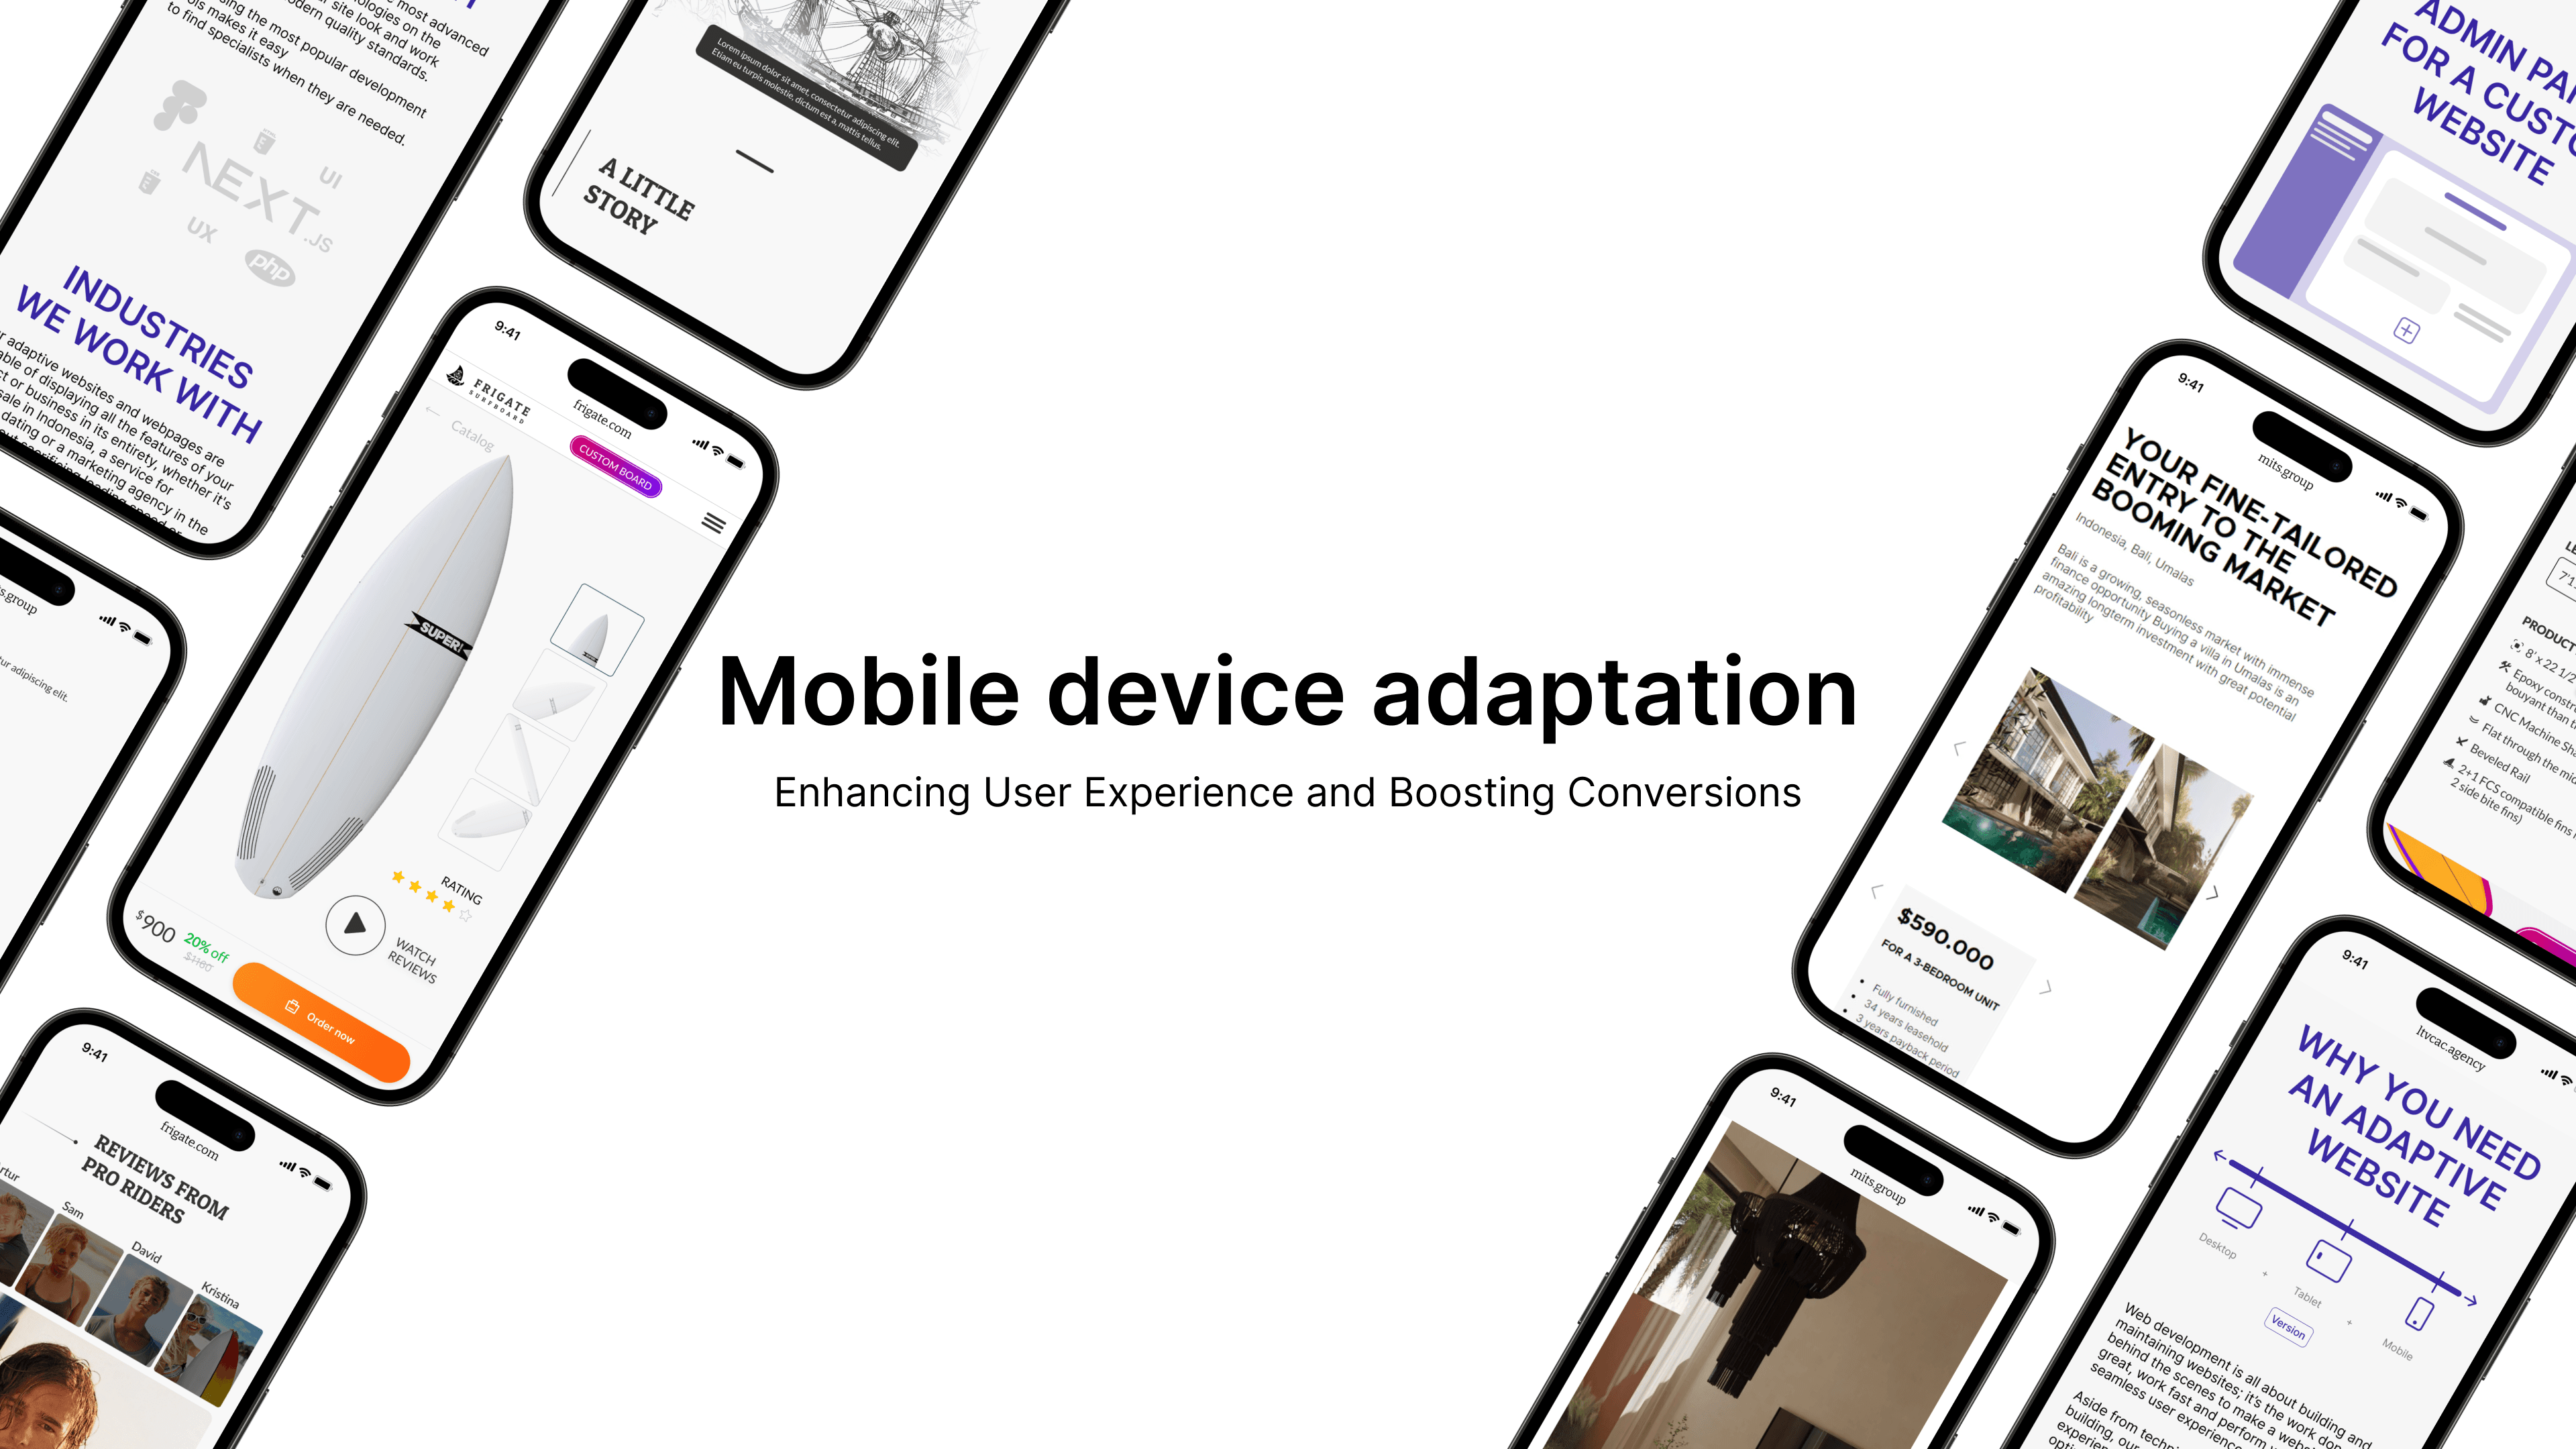 Mobile device adaptation